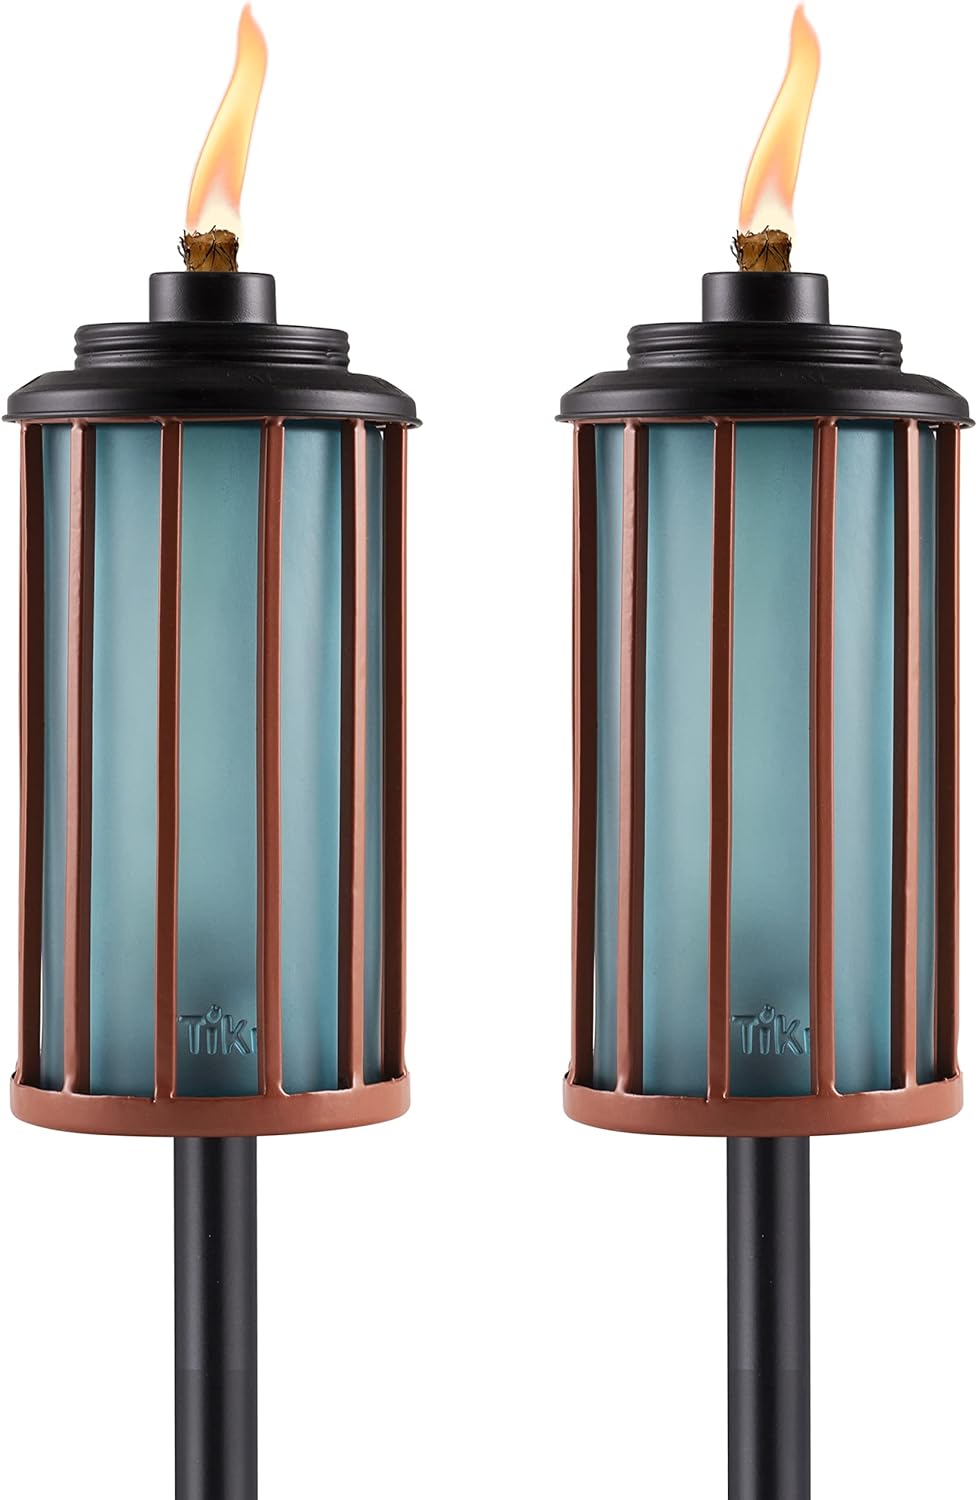 TIKI Brand 2-Pack Retro Stripe Glass Easy Install Tiki Torch, Outdoor Decorative Lighting for Lawn Patio Backyard, 65 Inch, Blue and Copper, 1122119